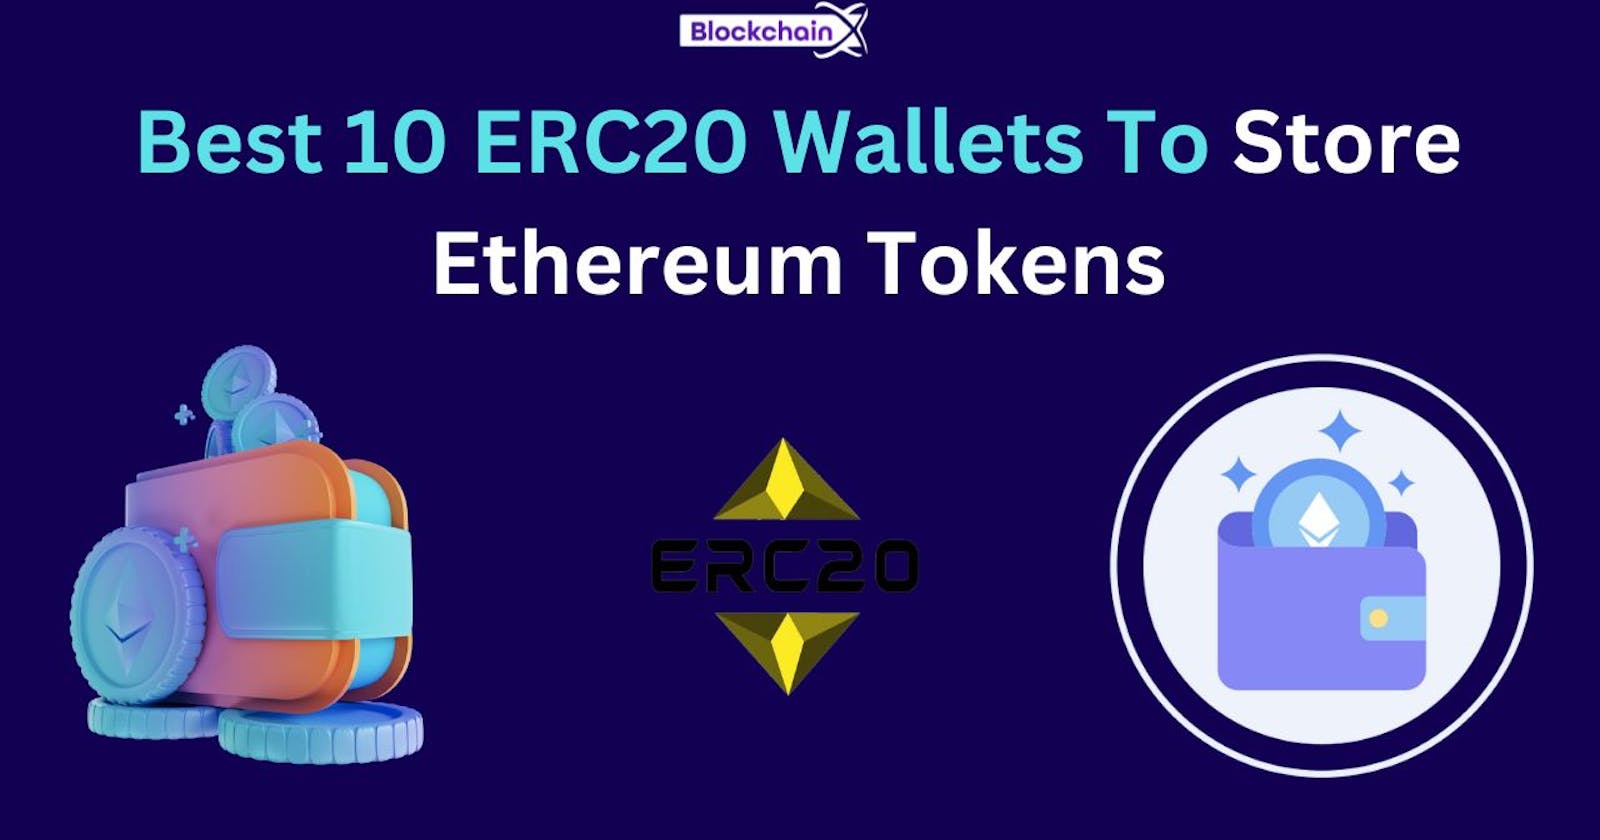 Best 10 ERC20 Wallets To Store Ethereum Tokens in Upcoming Days.